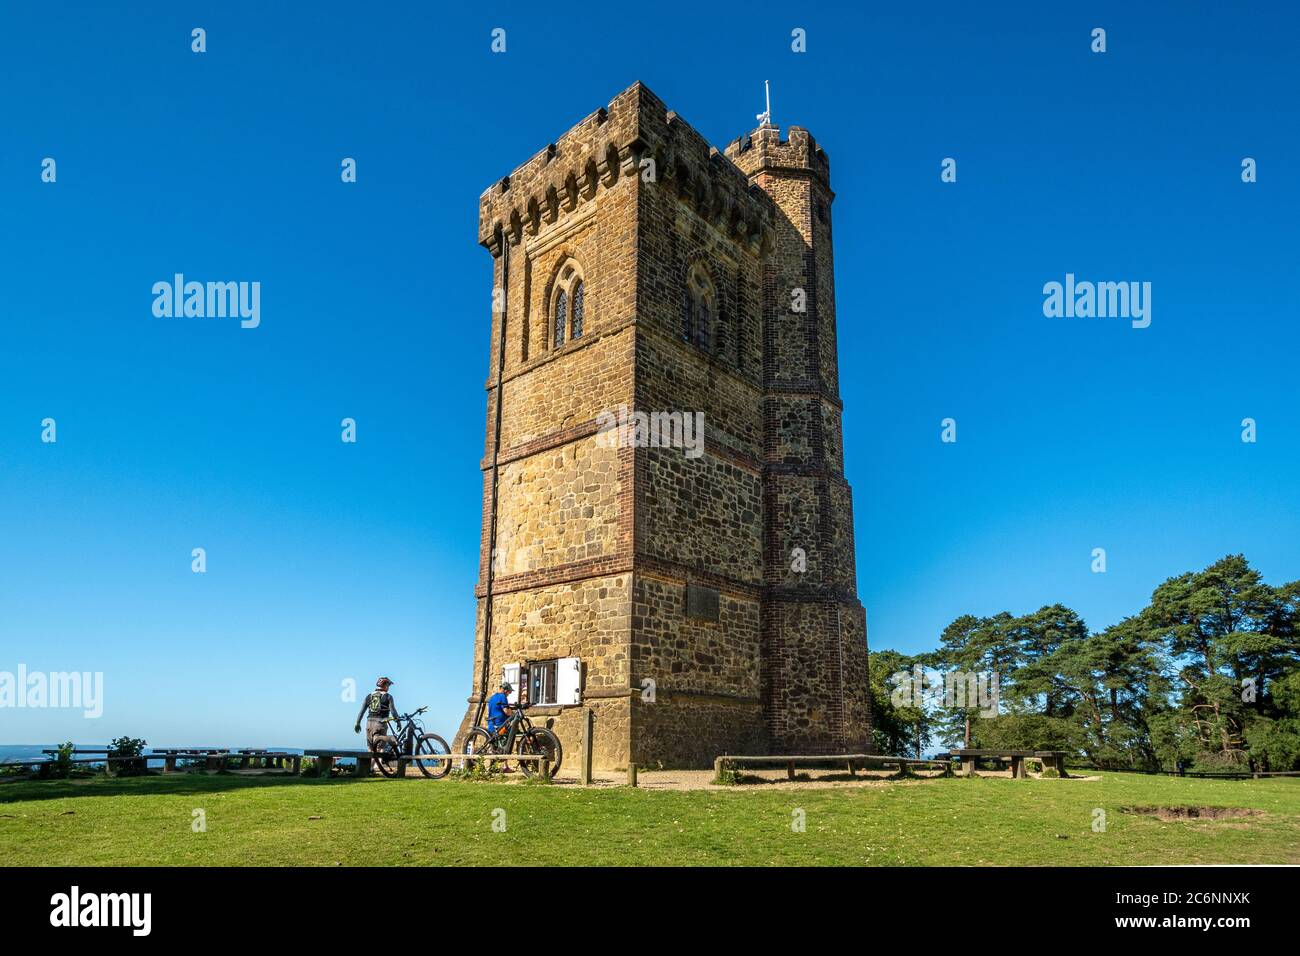 Cyclists at Leith Hill Tower, Surrey, England, UK, during summer Stock Photo